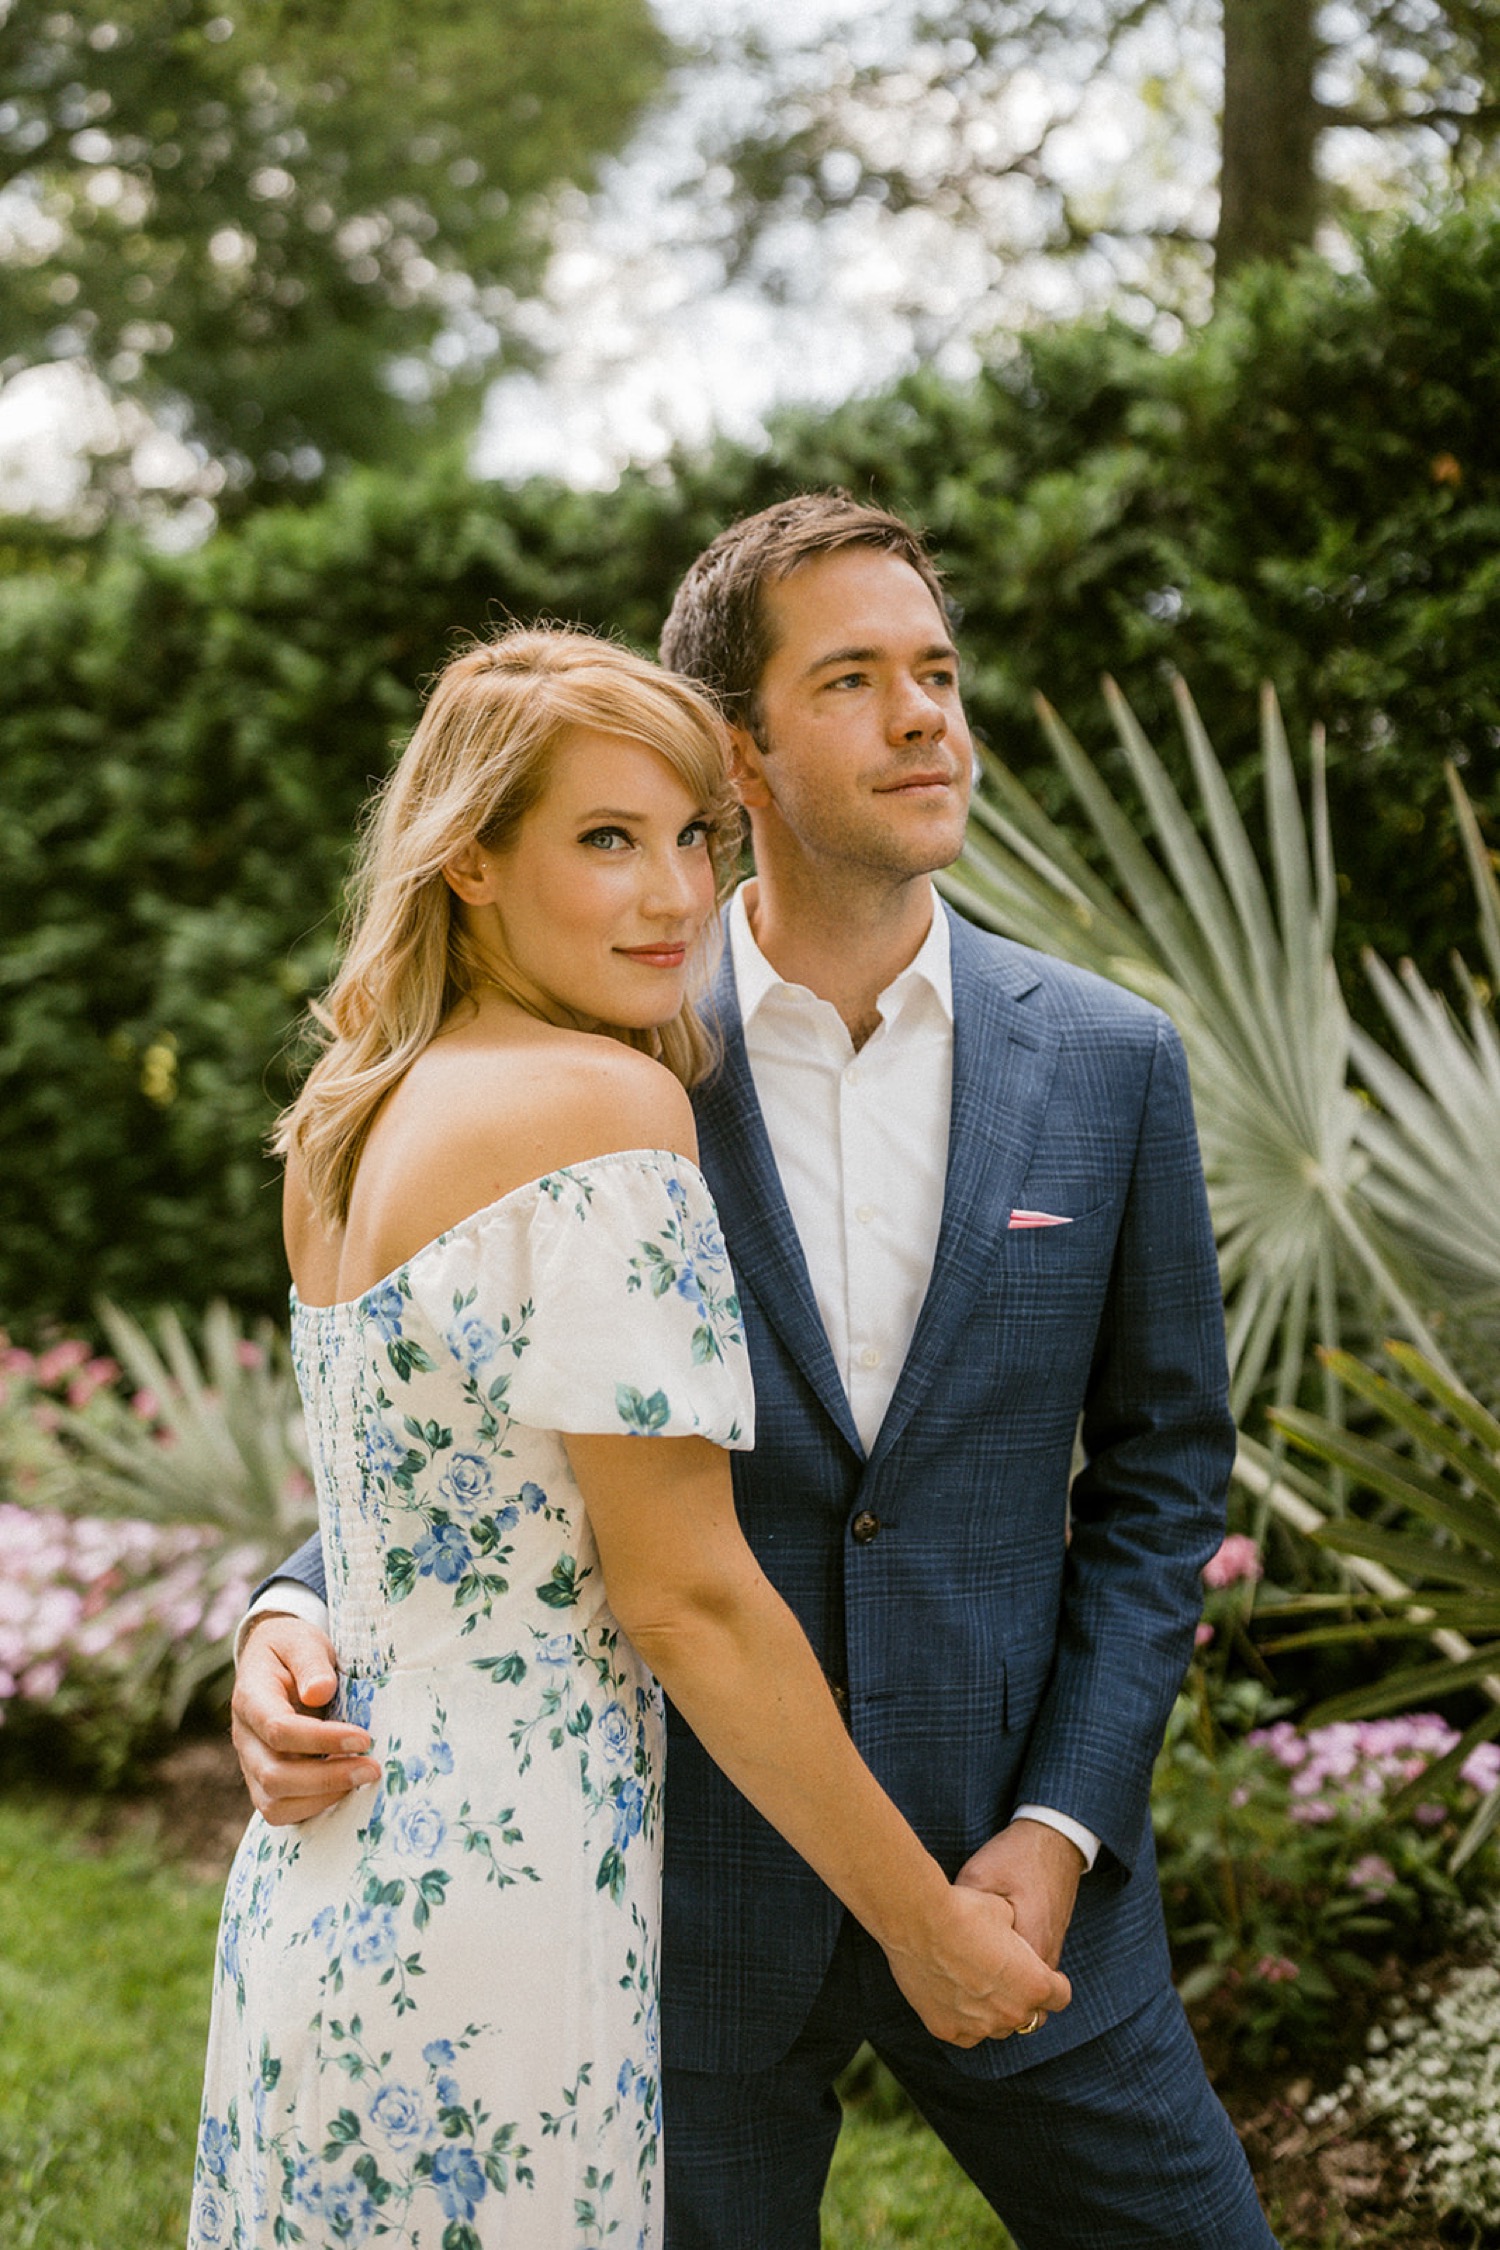 longwood gardens engagement session formal couple greenery